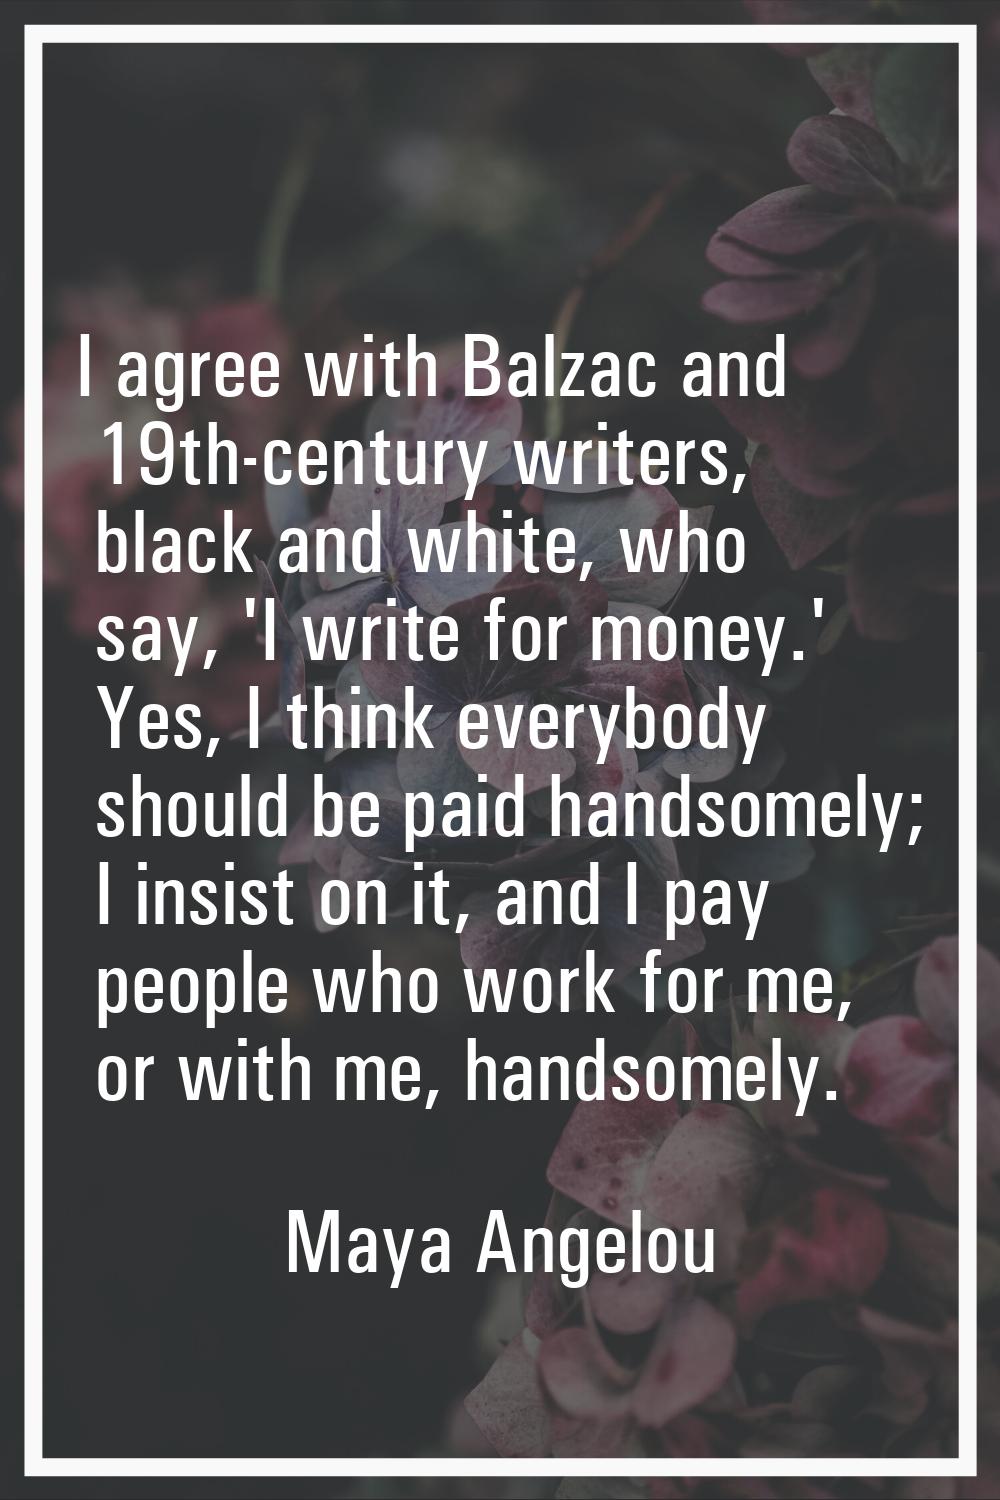 I agree with Balzac and 19th-century writers, black and white, who say, 'I write for money.' Yes, I